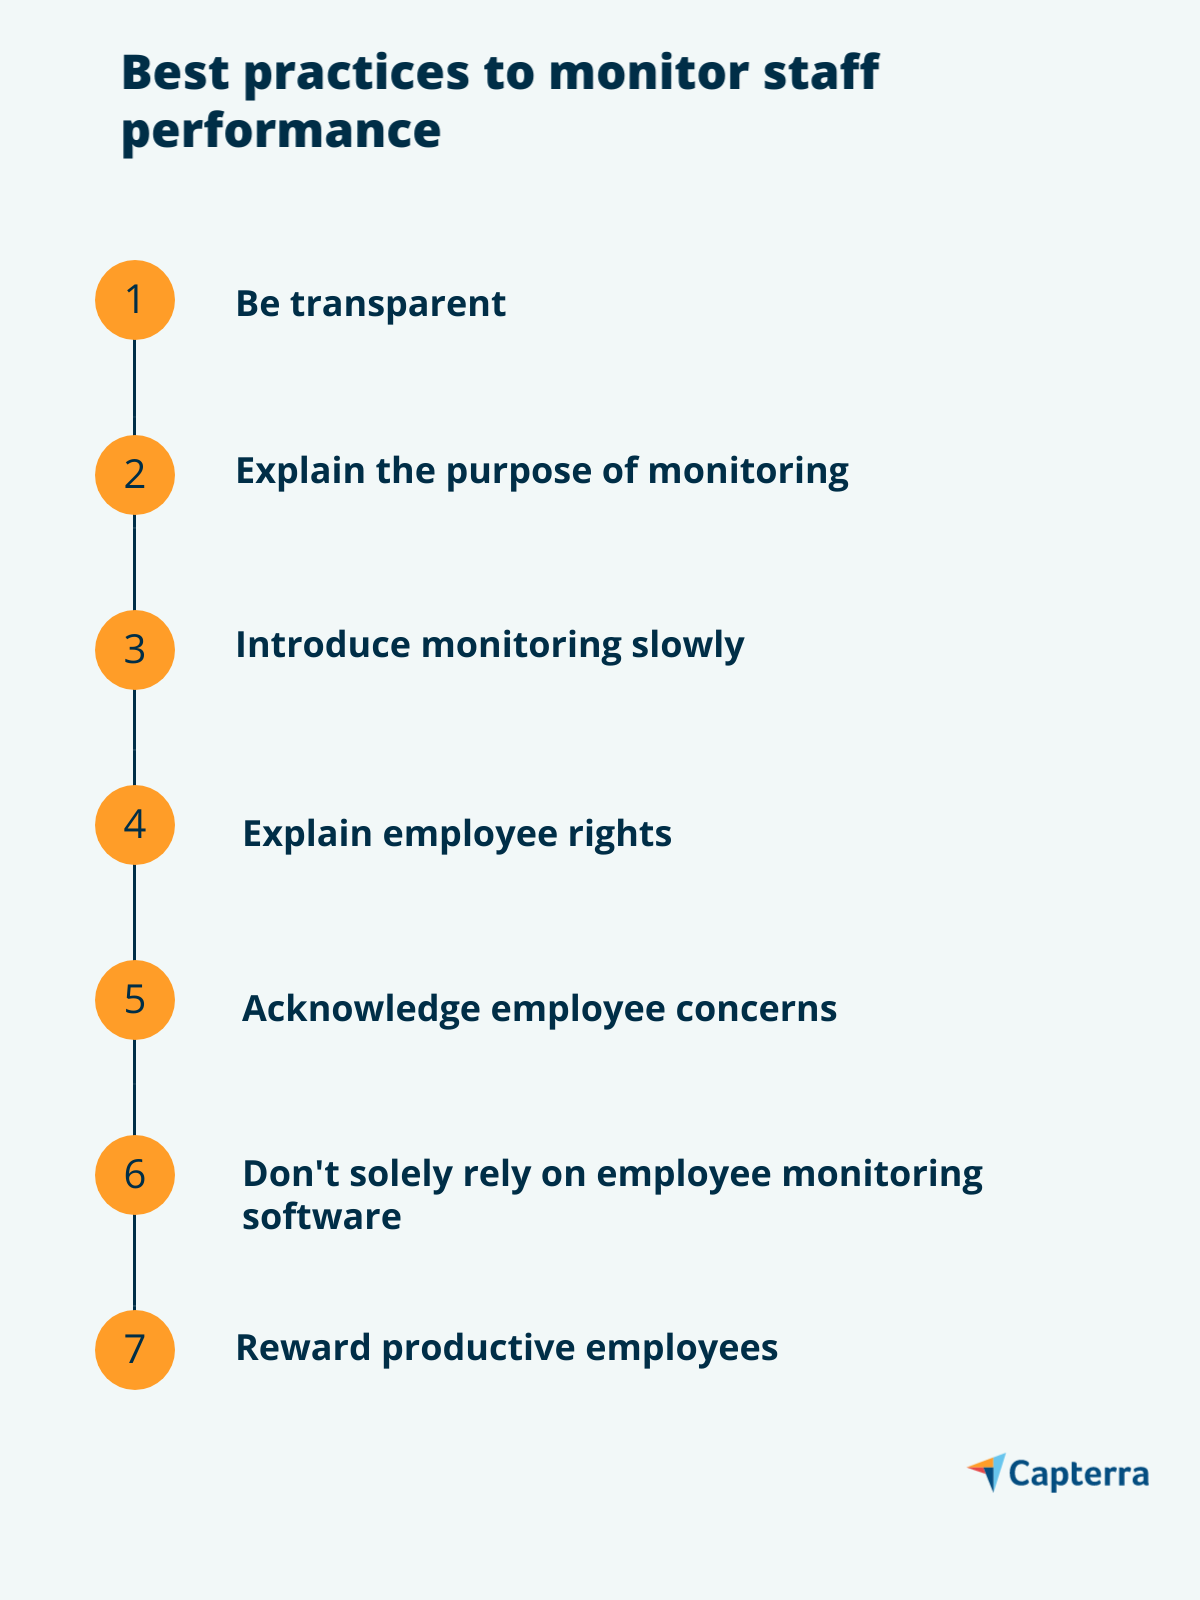 The best practices to monitor staff performance are broken down into 7 steps